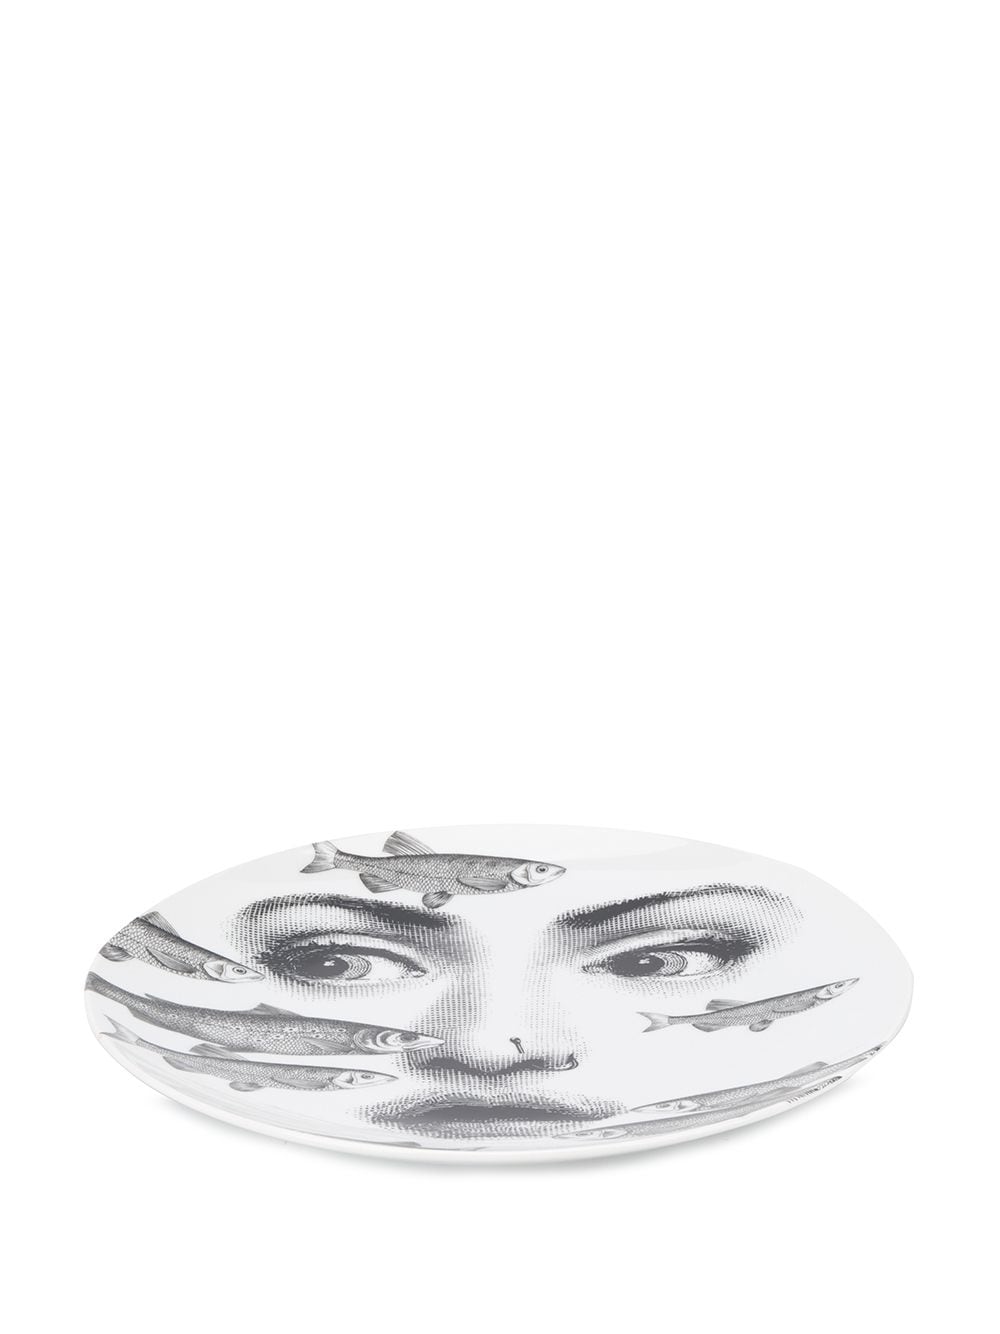 Image 2 of Fornasetti illustrated plate